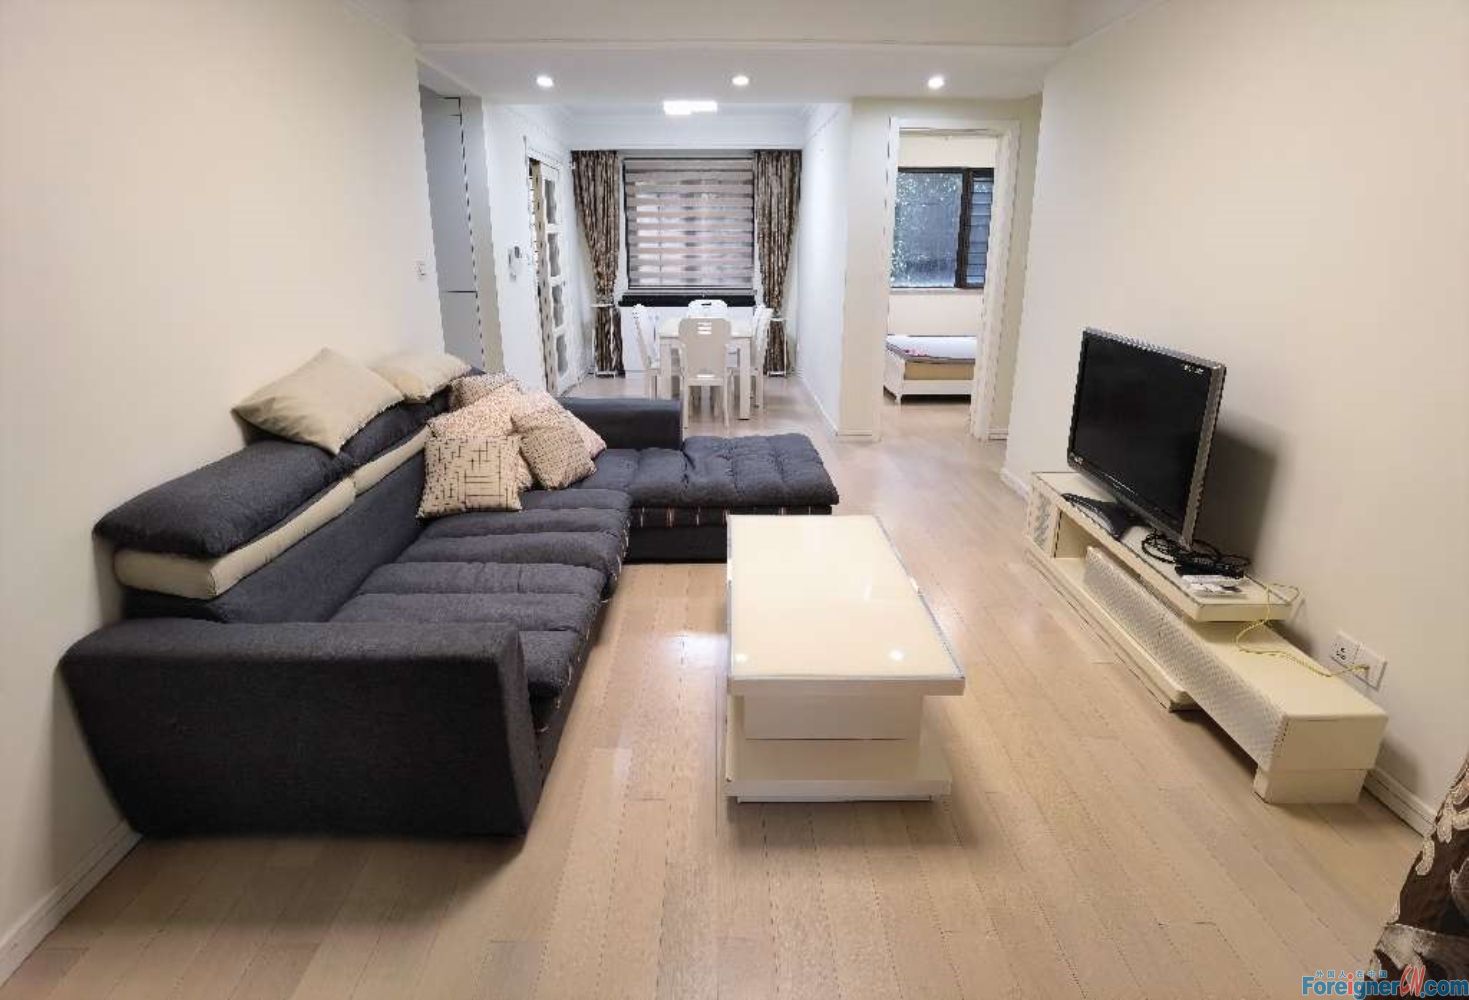 Terrific !!Haiyue Garden apartment rent in Suzhou /2 bedrooms and 1 bathroom/first-floor flat with balcony/Baitang garden /Nearby Suzhou olympic center 